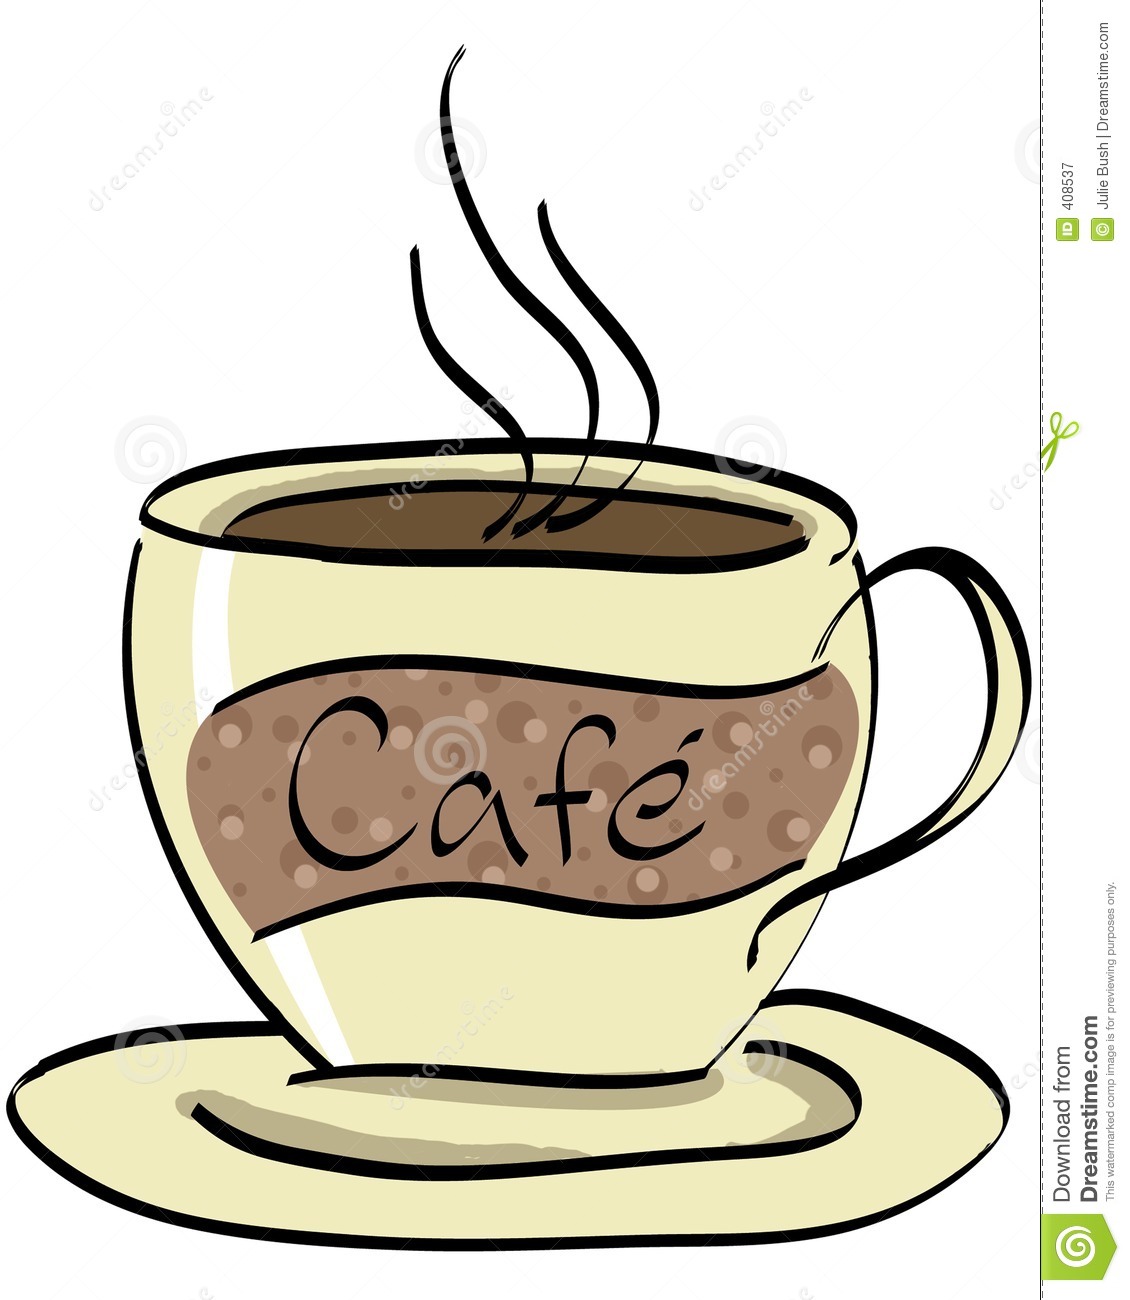 Cafeteria Clipart Cafe Clipart Cafe 2 408537 Jpg